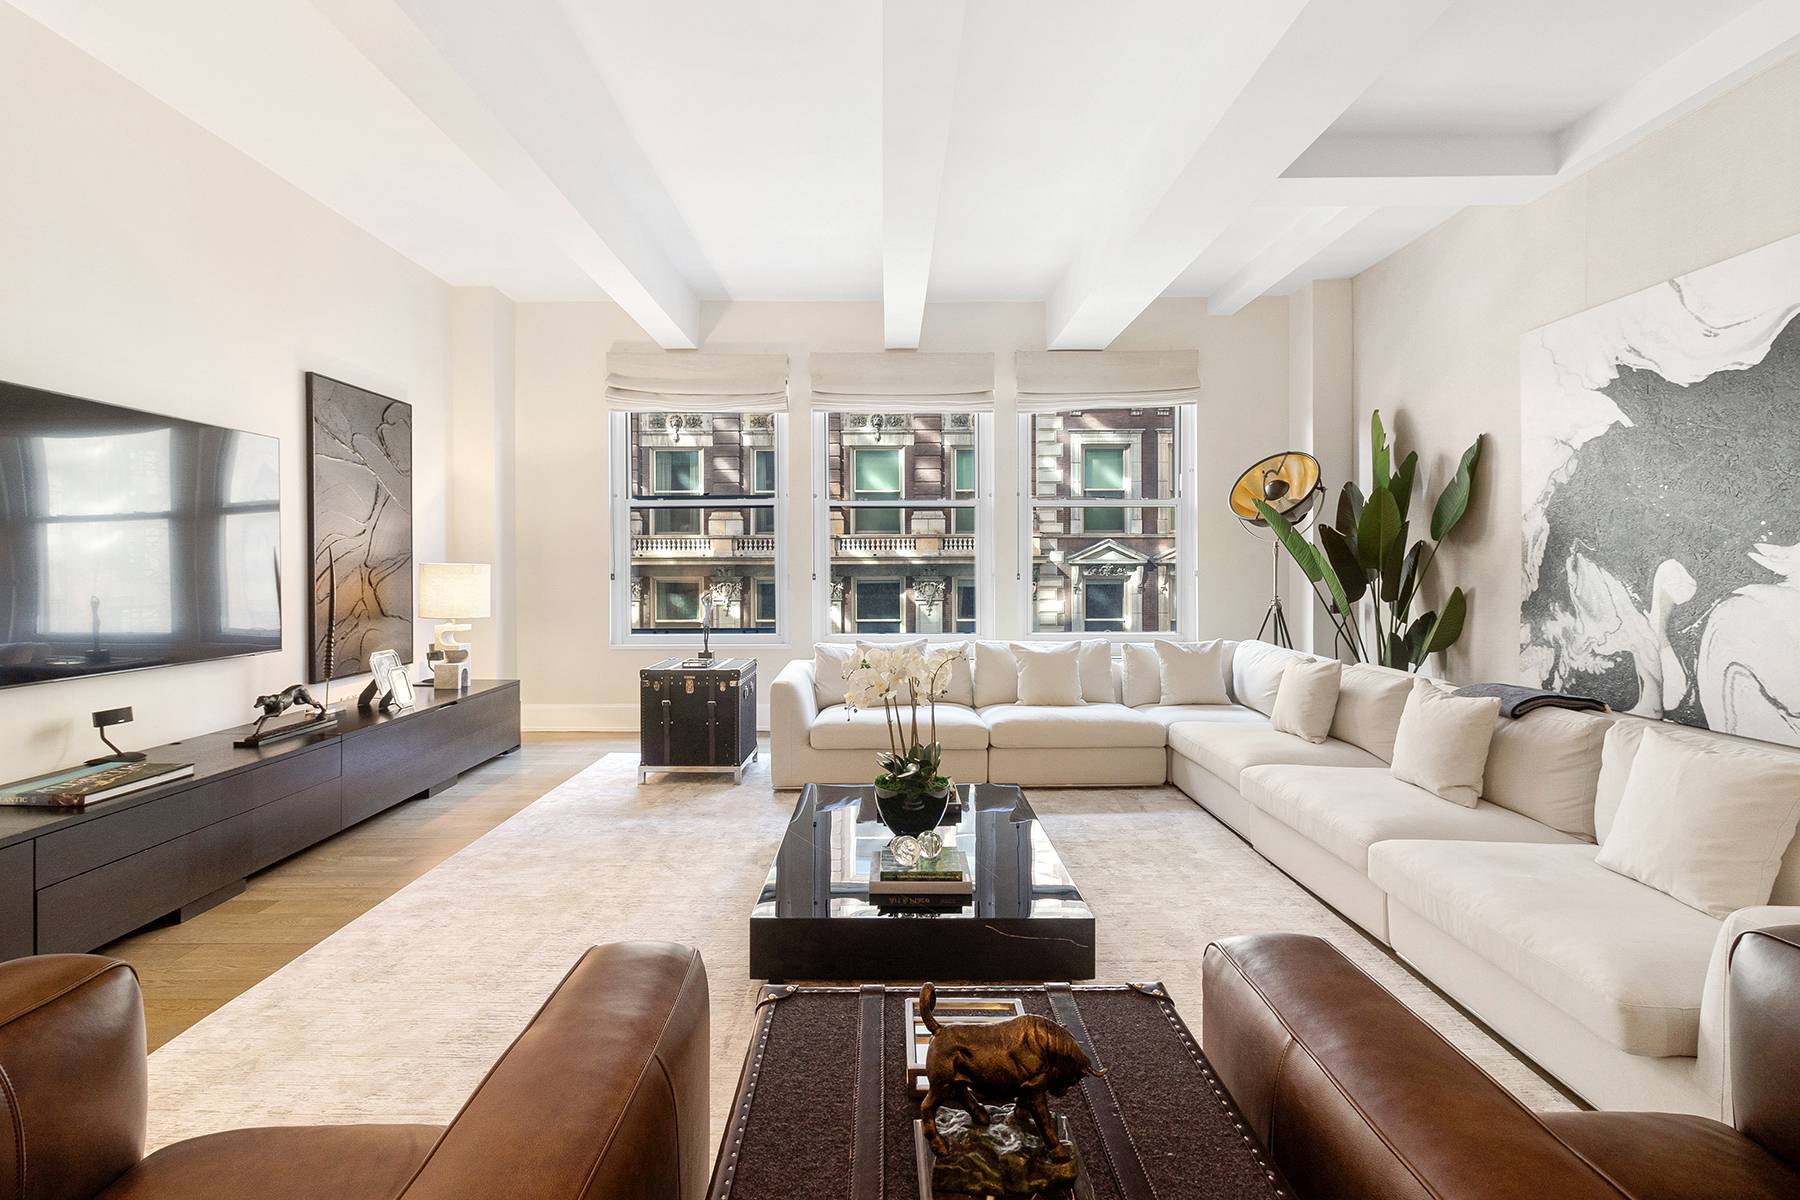 Introducing the Fifth Floor Duplex at 260 Park Avenue South Lofts Perfectly situated near Madison Square Park, the rarely available residence spans 2, 525 square feet across two levels with ...